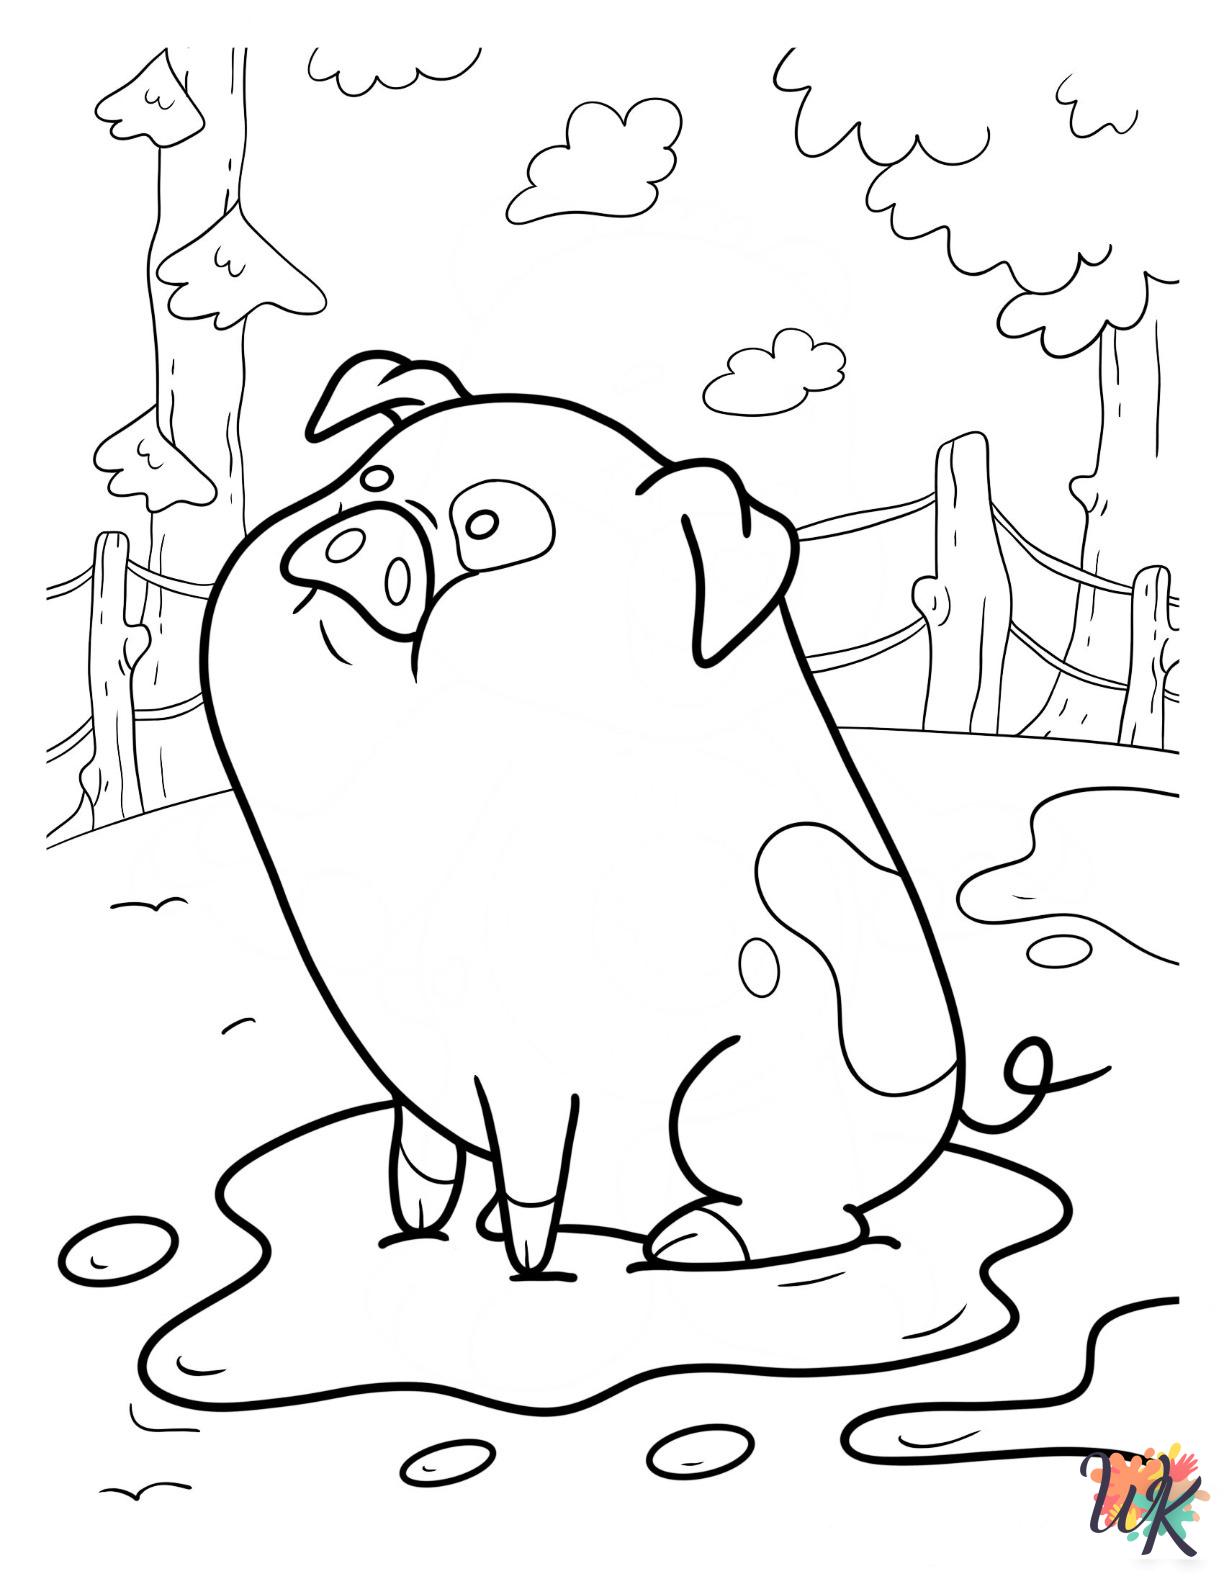 Gravity Falls coloring pages for preschoolers